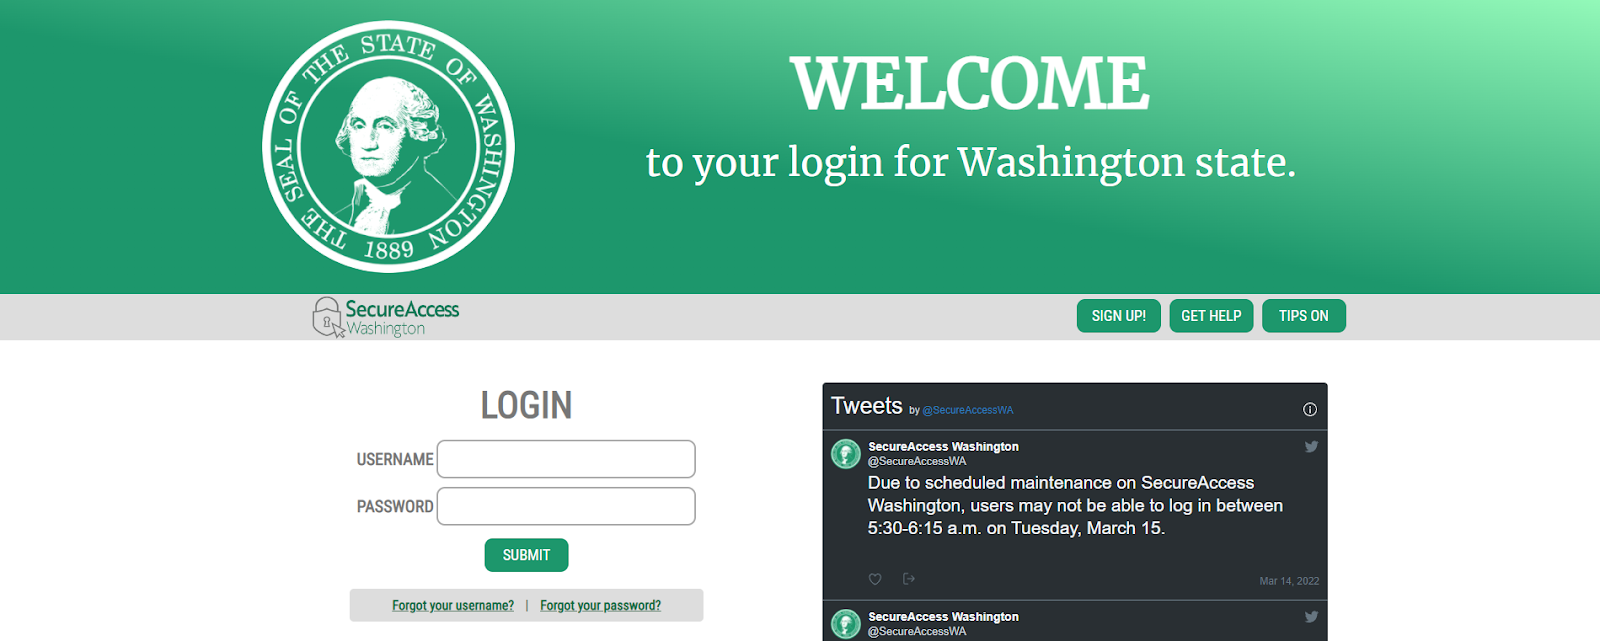 screenshot of CCR Welcome landing page